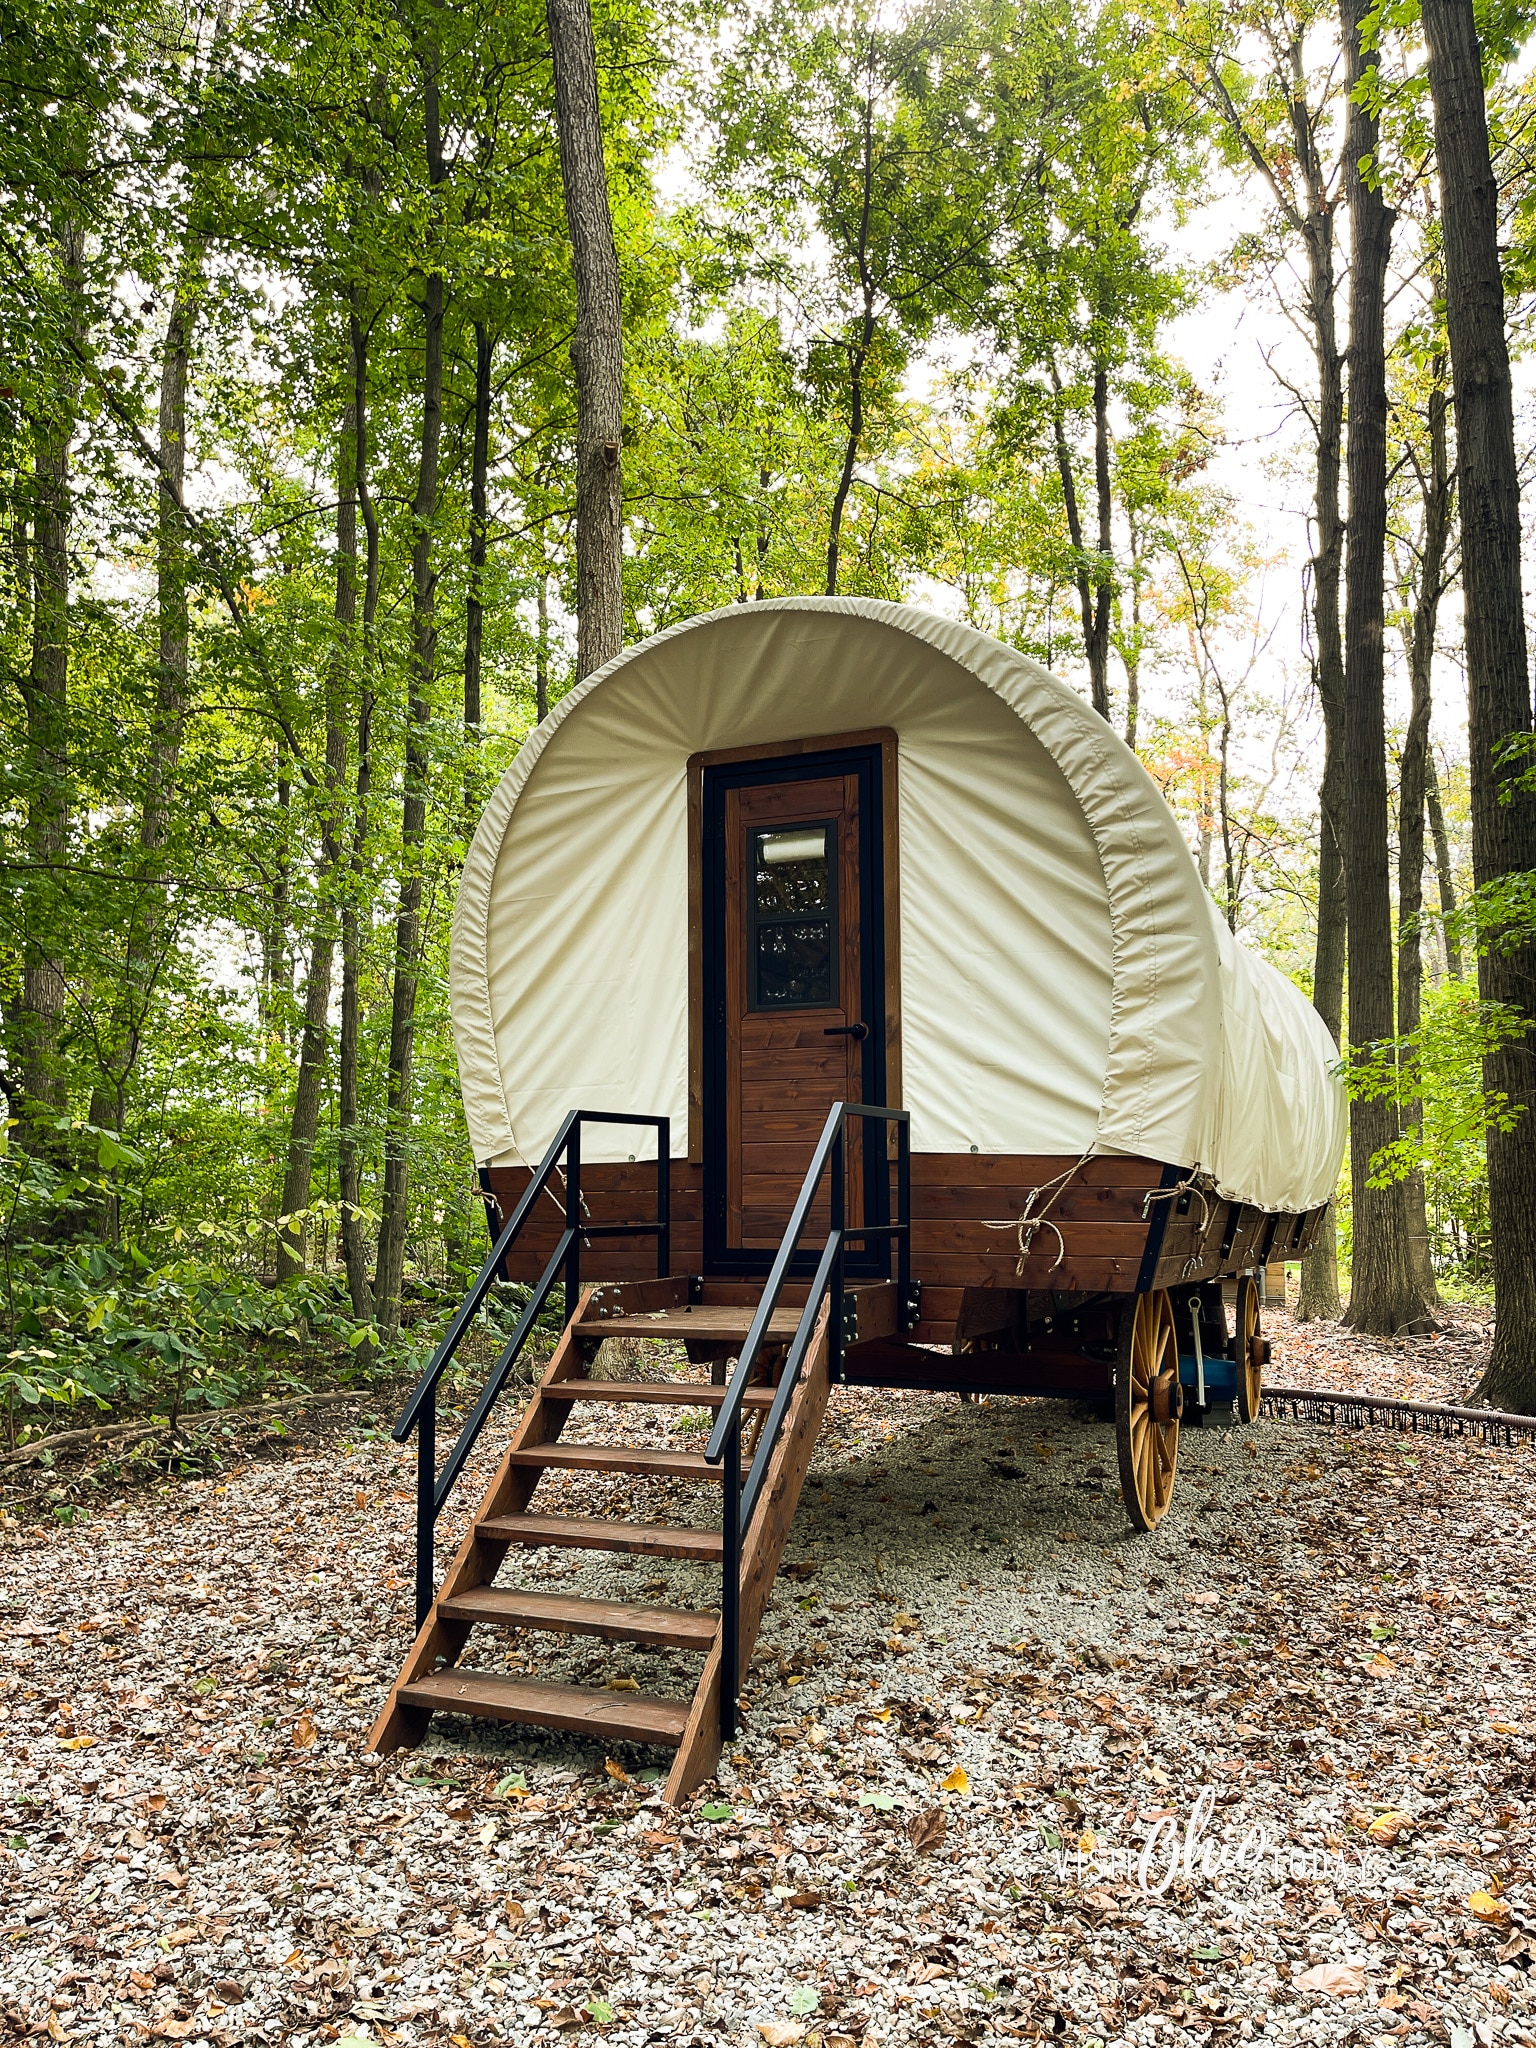 covered wagon in a forest with trees with green leaves and gravel. photo credit: Cindy Gordon of VisitOhioToday.com